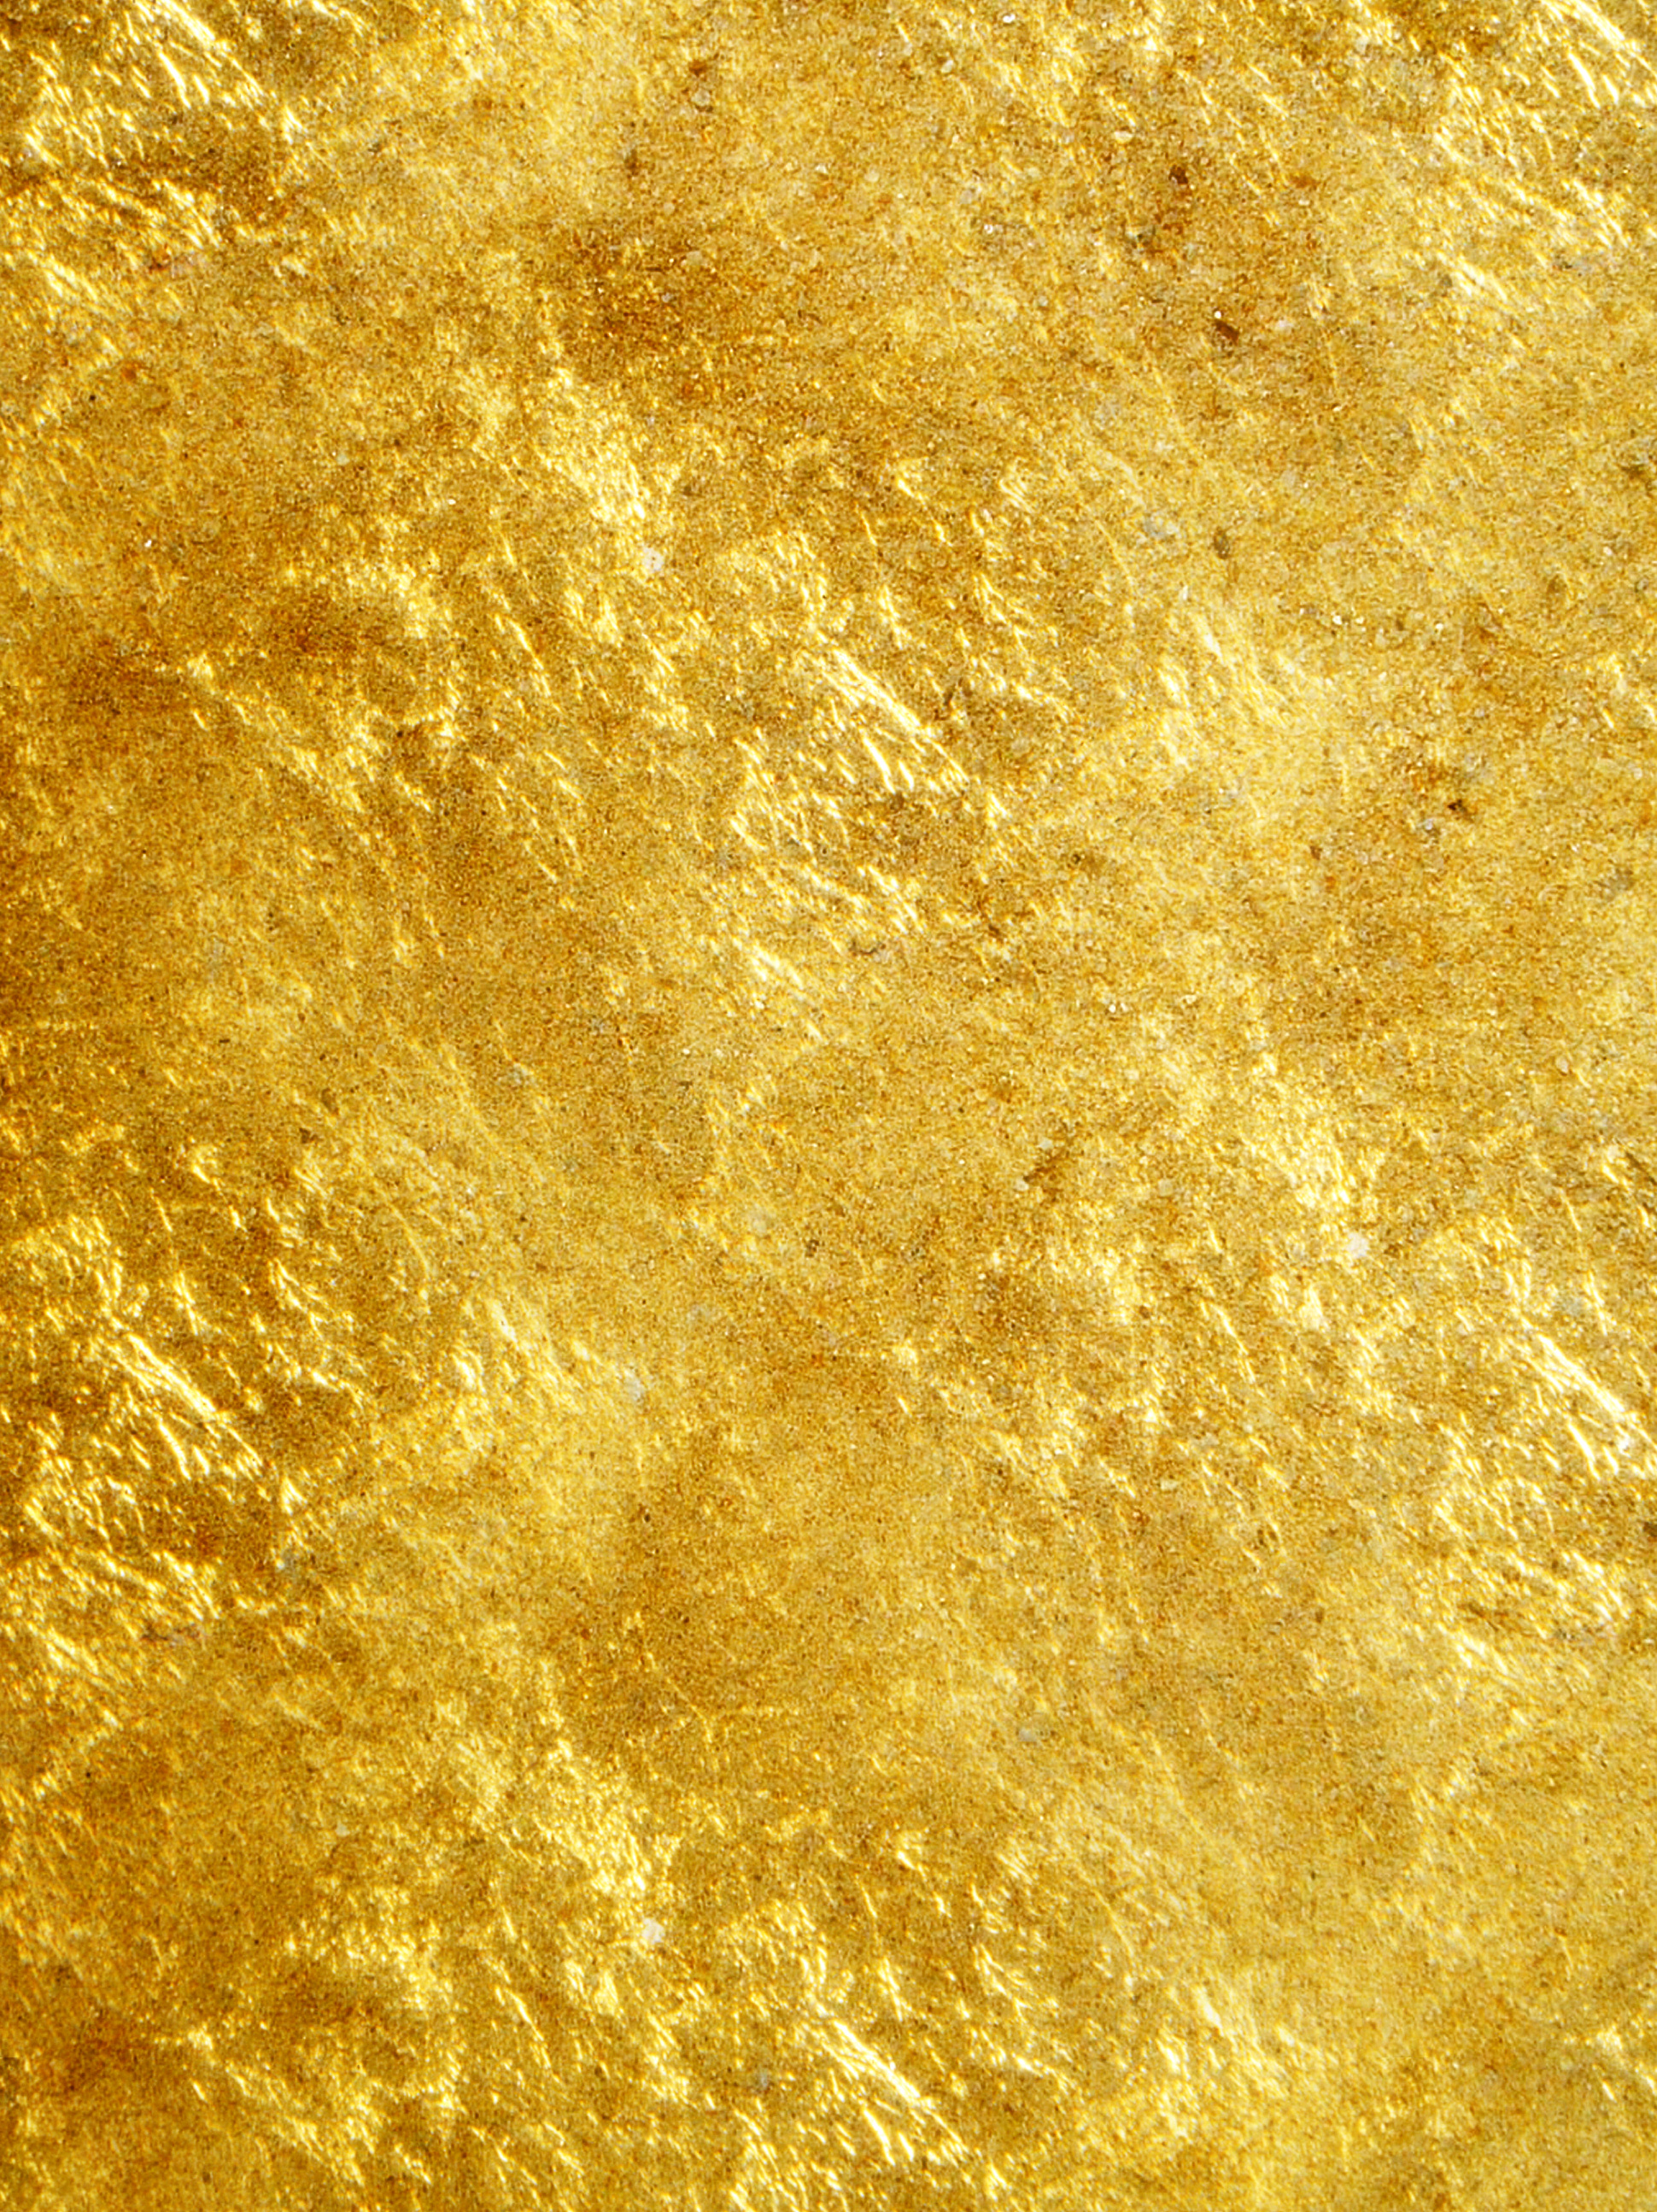 Texture Gold By Wanderingsoul Stox Resources Stock Image Textures